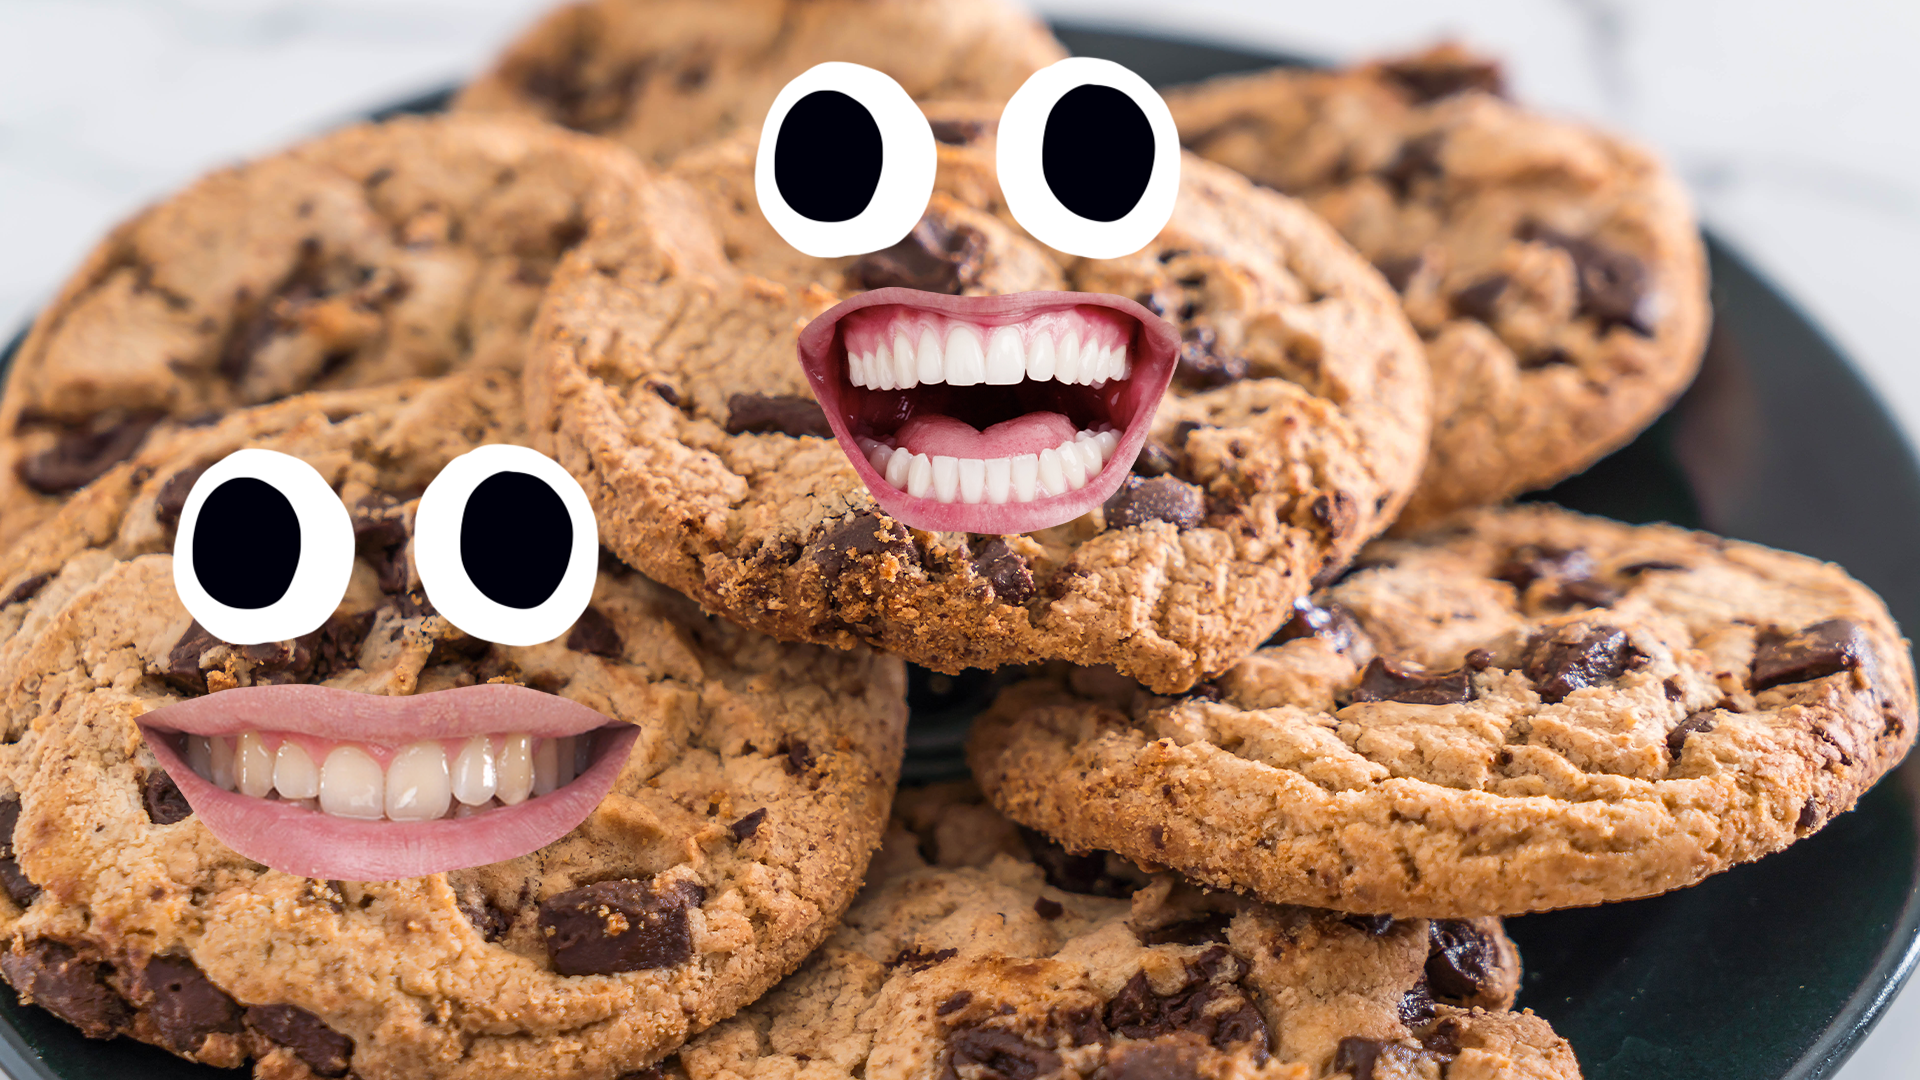 Cookies with goofy faces